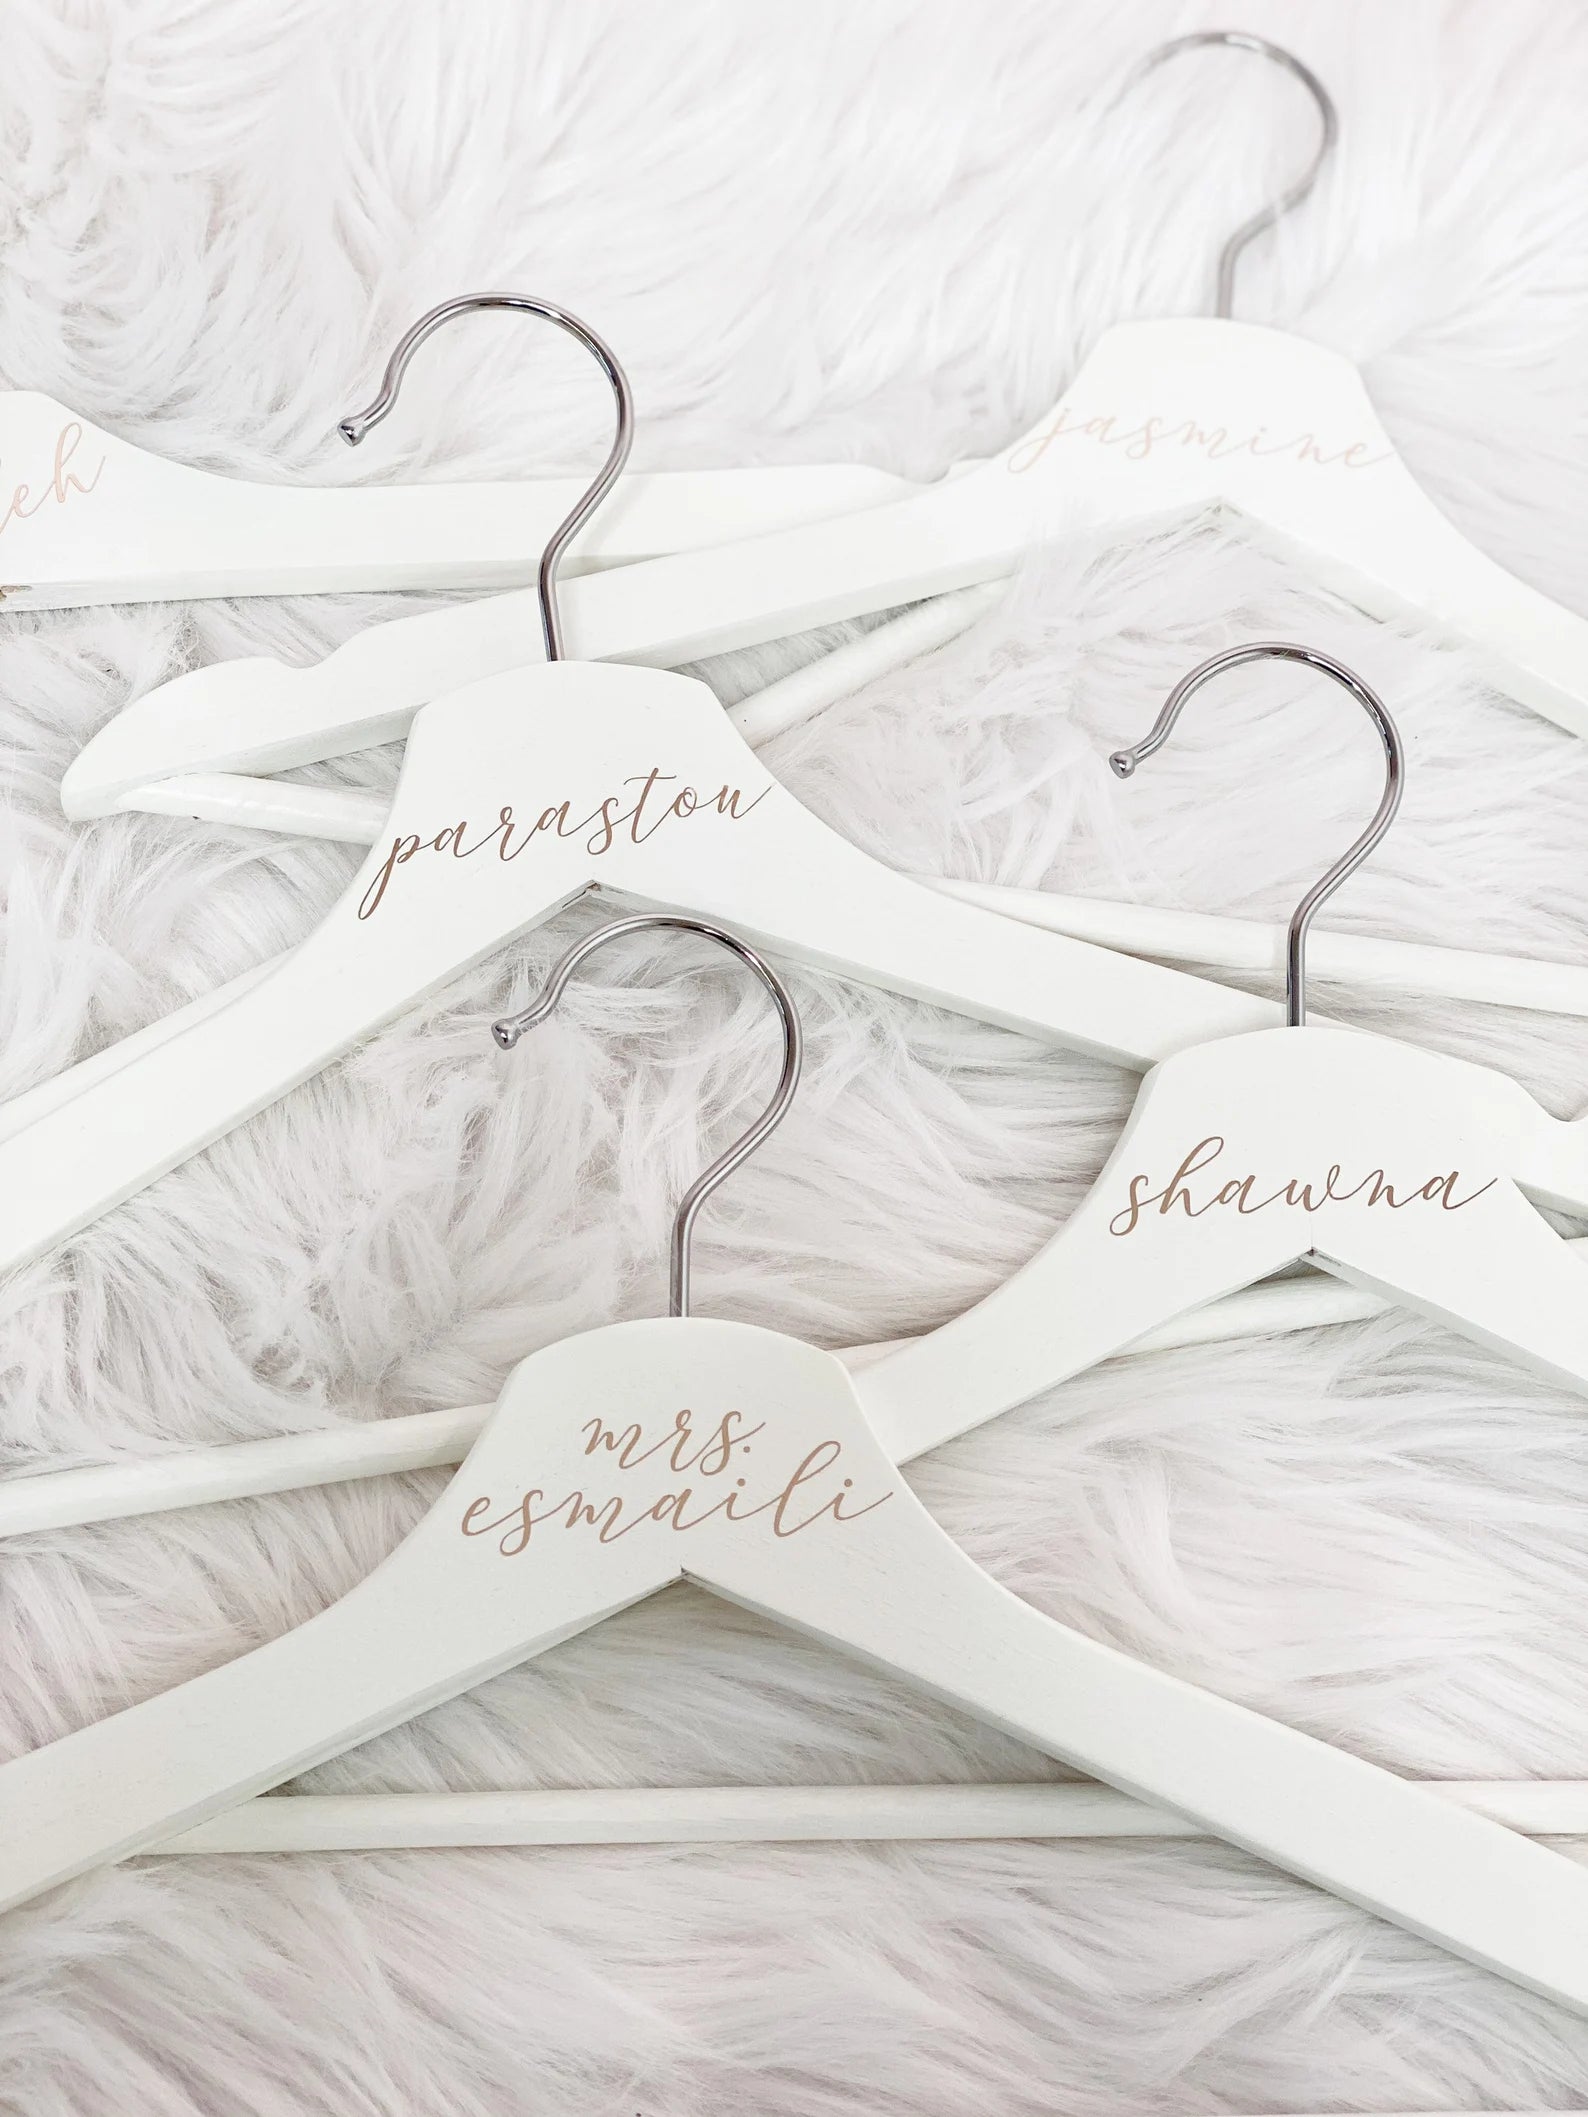 Bridesmaid white wood hangers - personalized bride hanger- custom hanger gift for bridal party- bridesmaid gift ideas- hangers with name